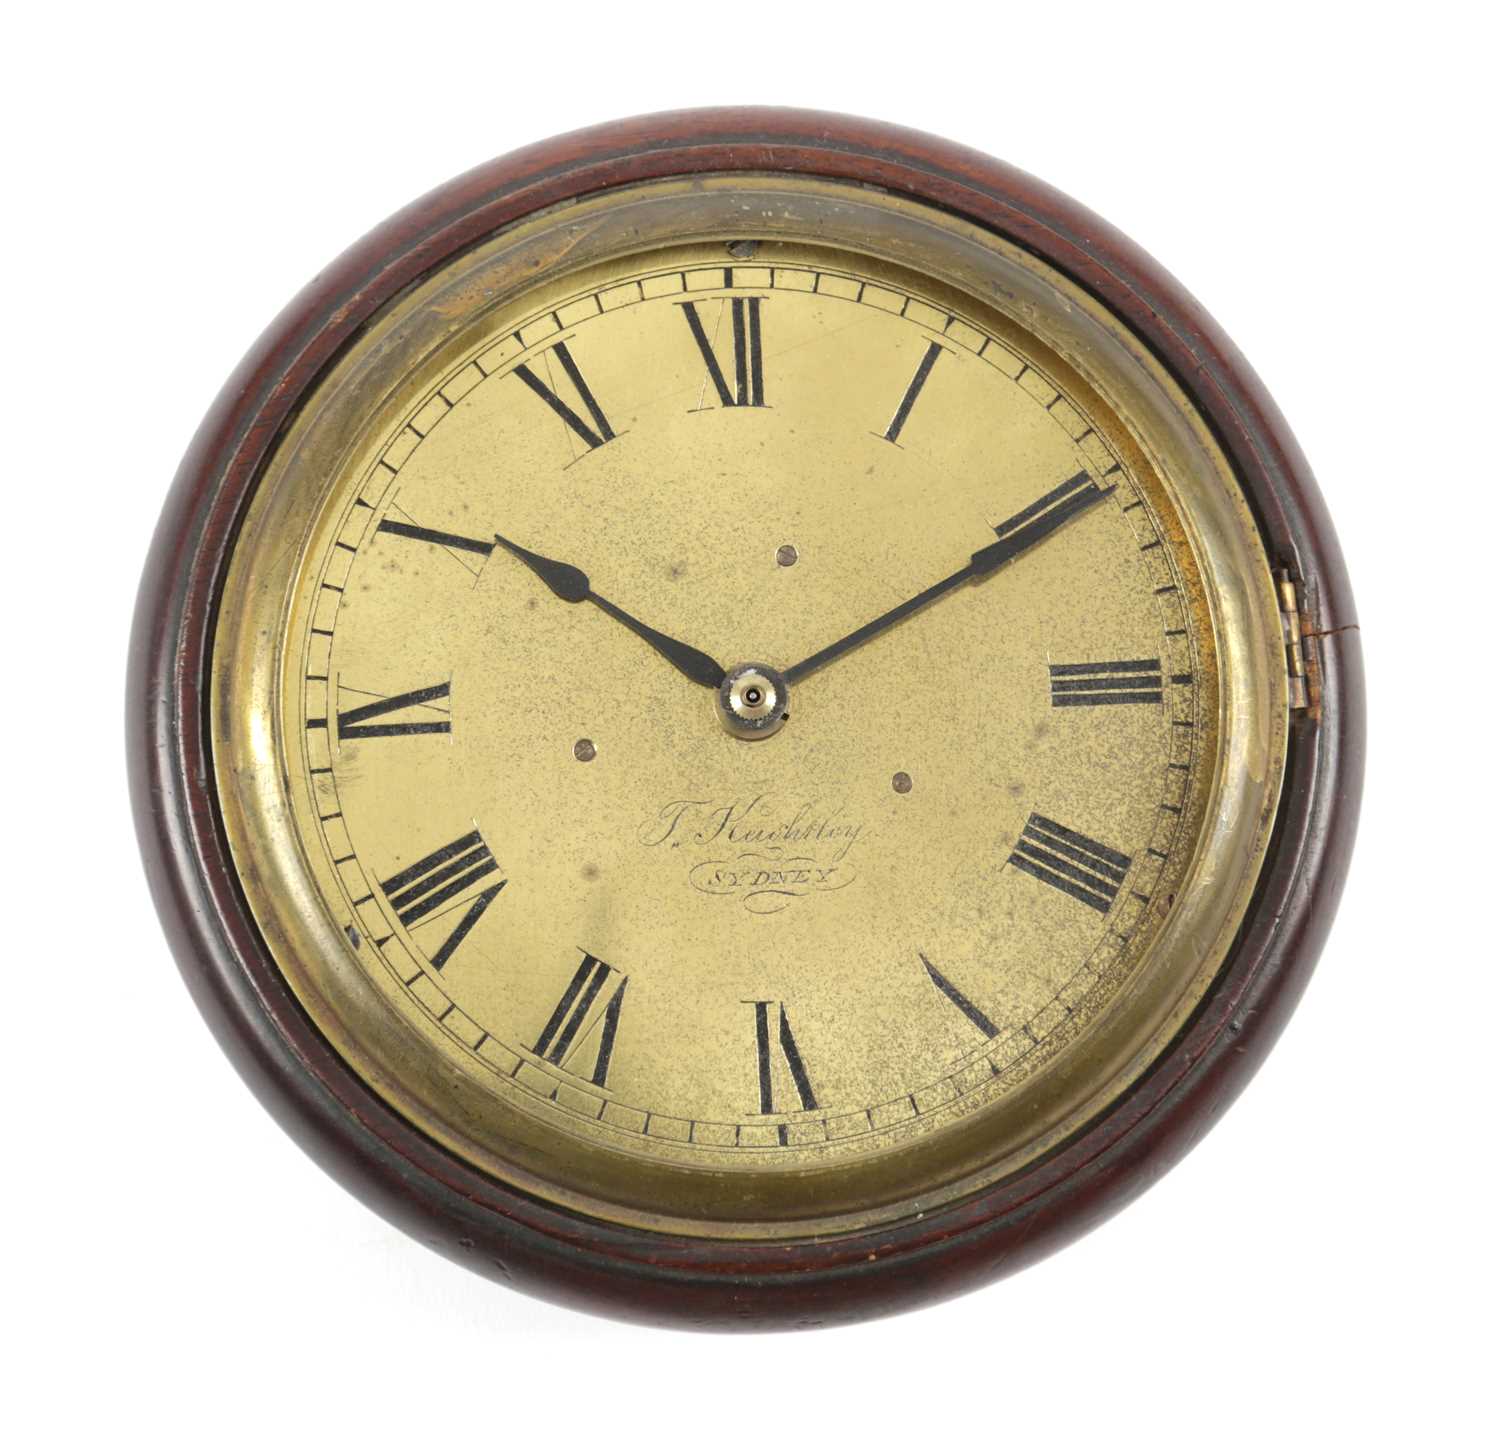 A MAHOGANY AND BRASS SEDAN CLOCK INSCRIBED 'F. KEIGHTLEY, SYDNEY' the 5 3/4inch dial with black